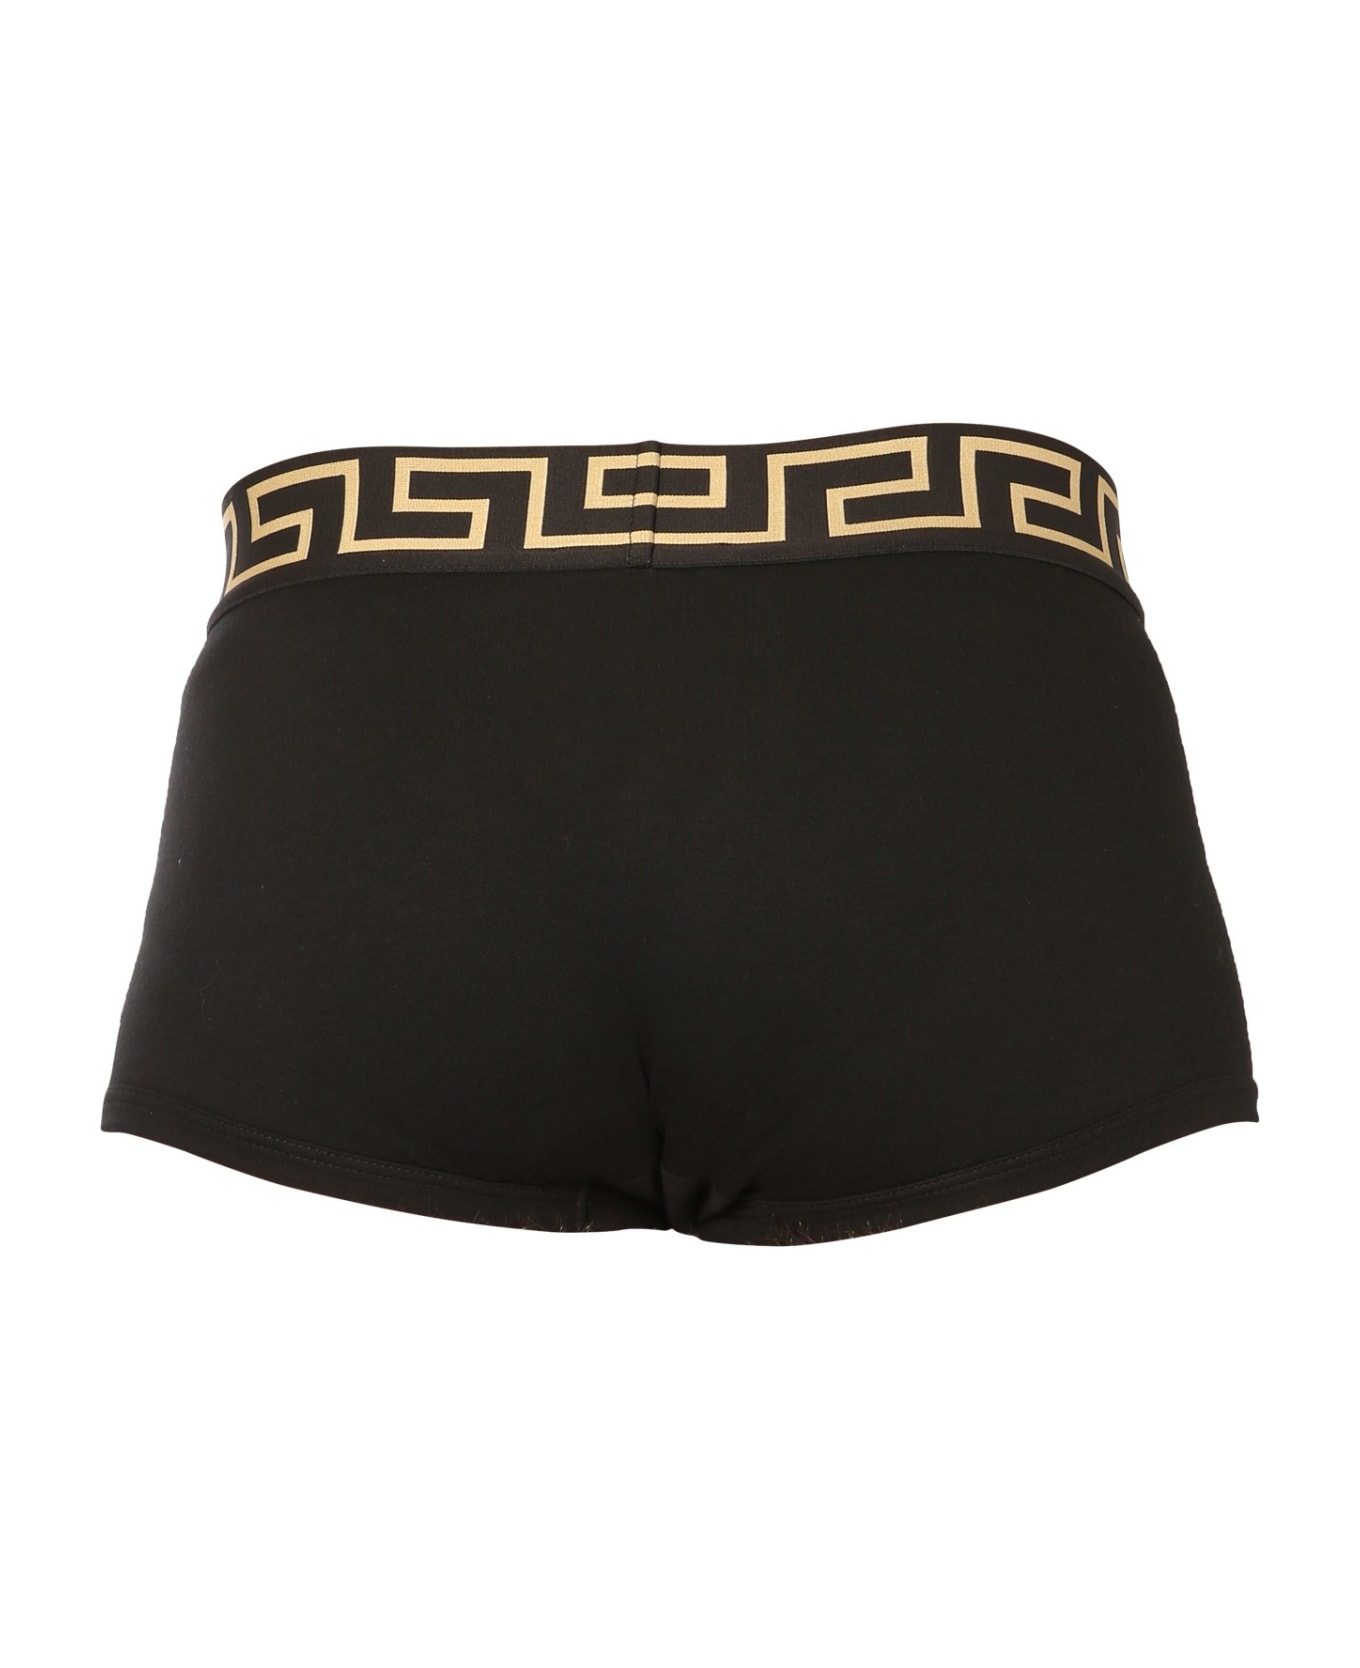 Versace Pack Of Two Boxer Shorts With Greek - Black